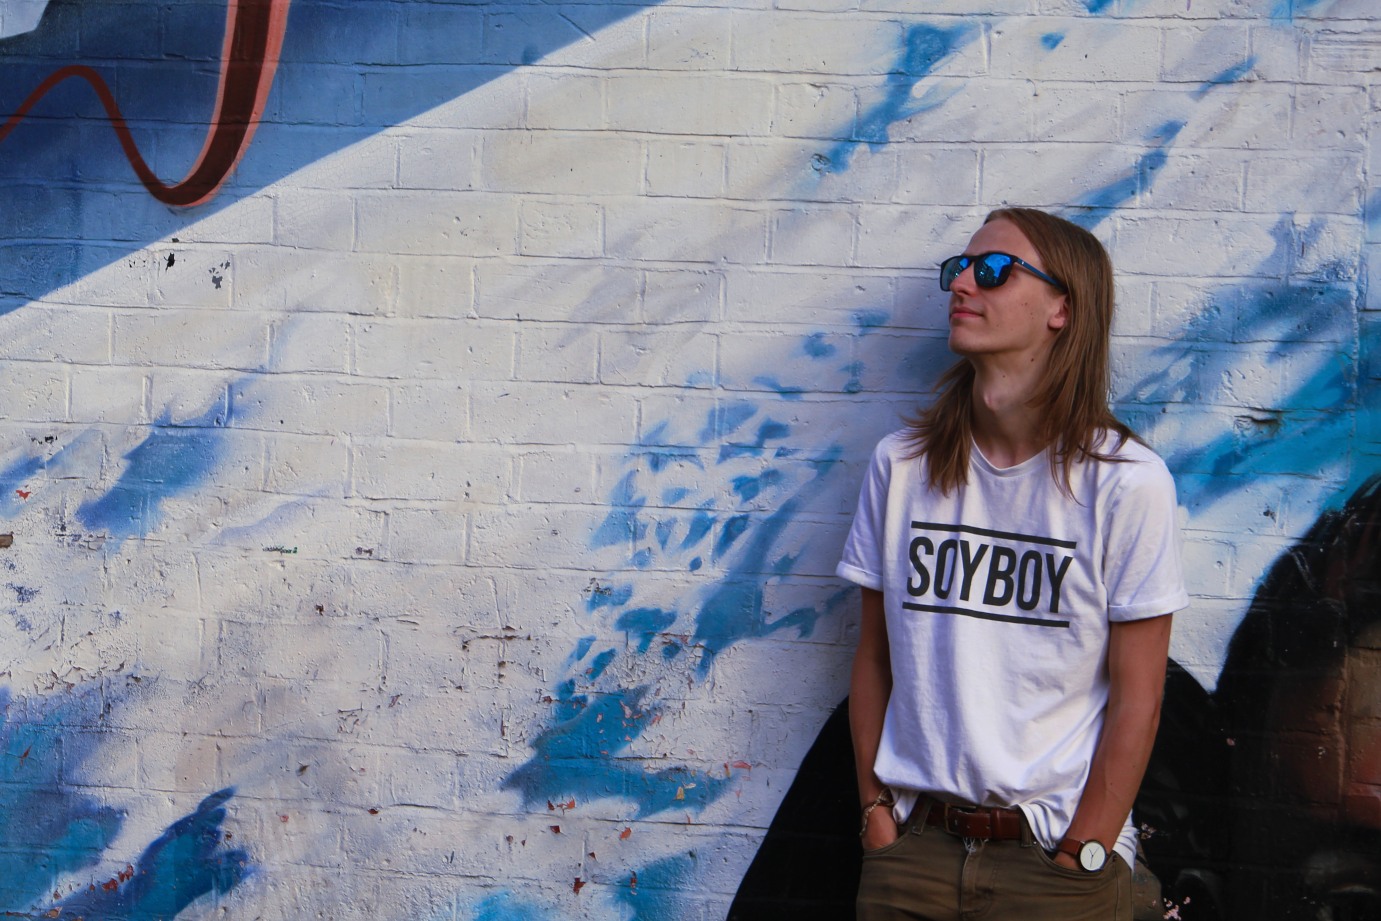 Portrait photo of a skinny white guy with long blond hair wearing sunglasses and a white t-shirt that says “SOYBOY” while stood against a blue and white mural trying his best to look cool